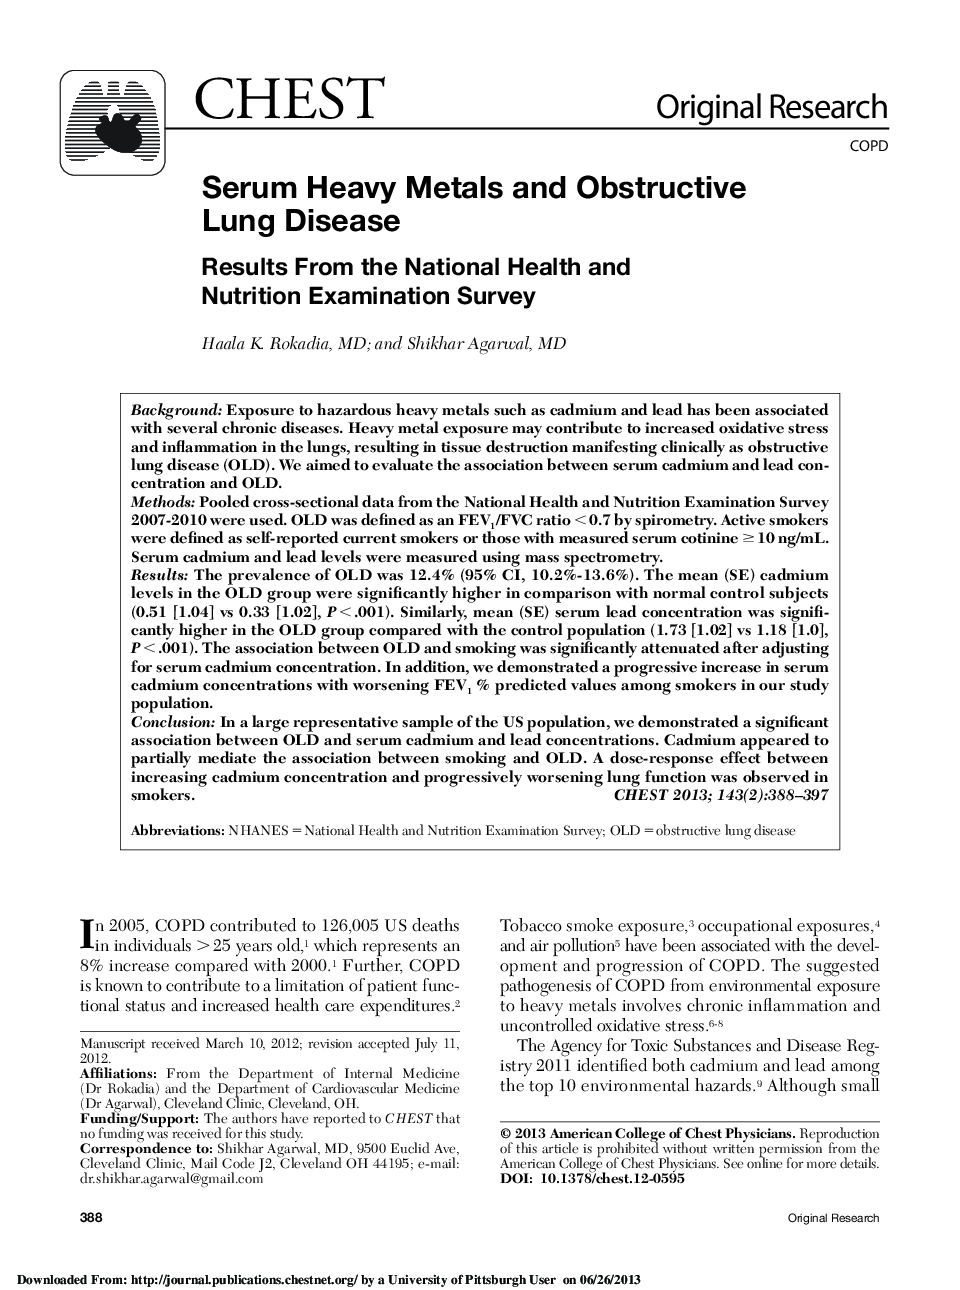 Serum Heavy Metals and Obstructive Lung Disease